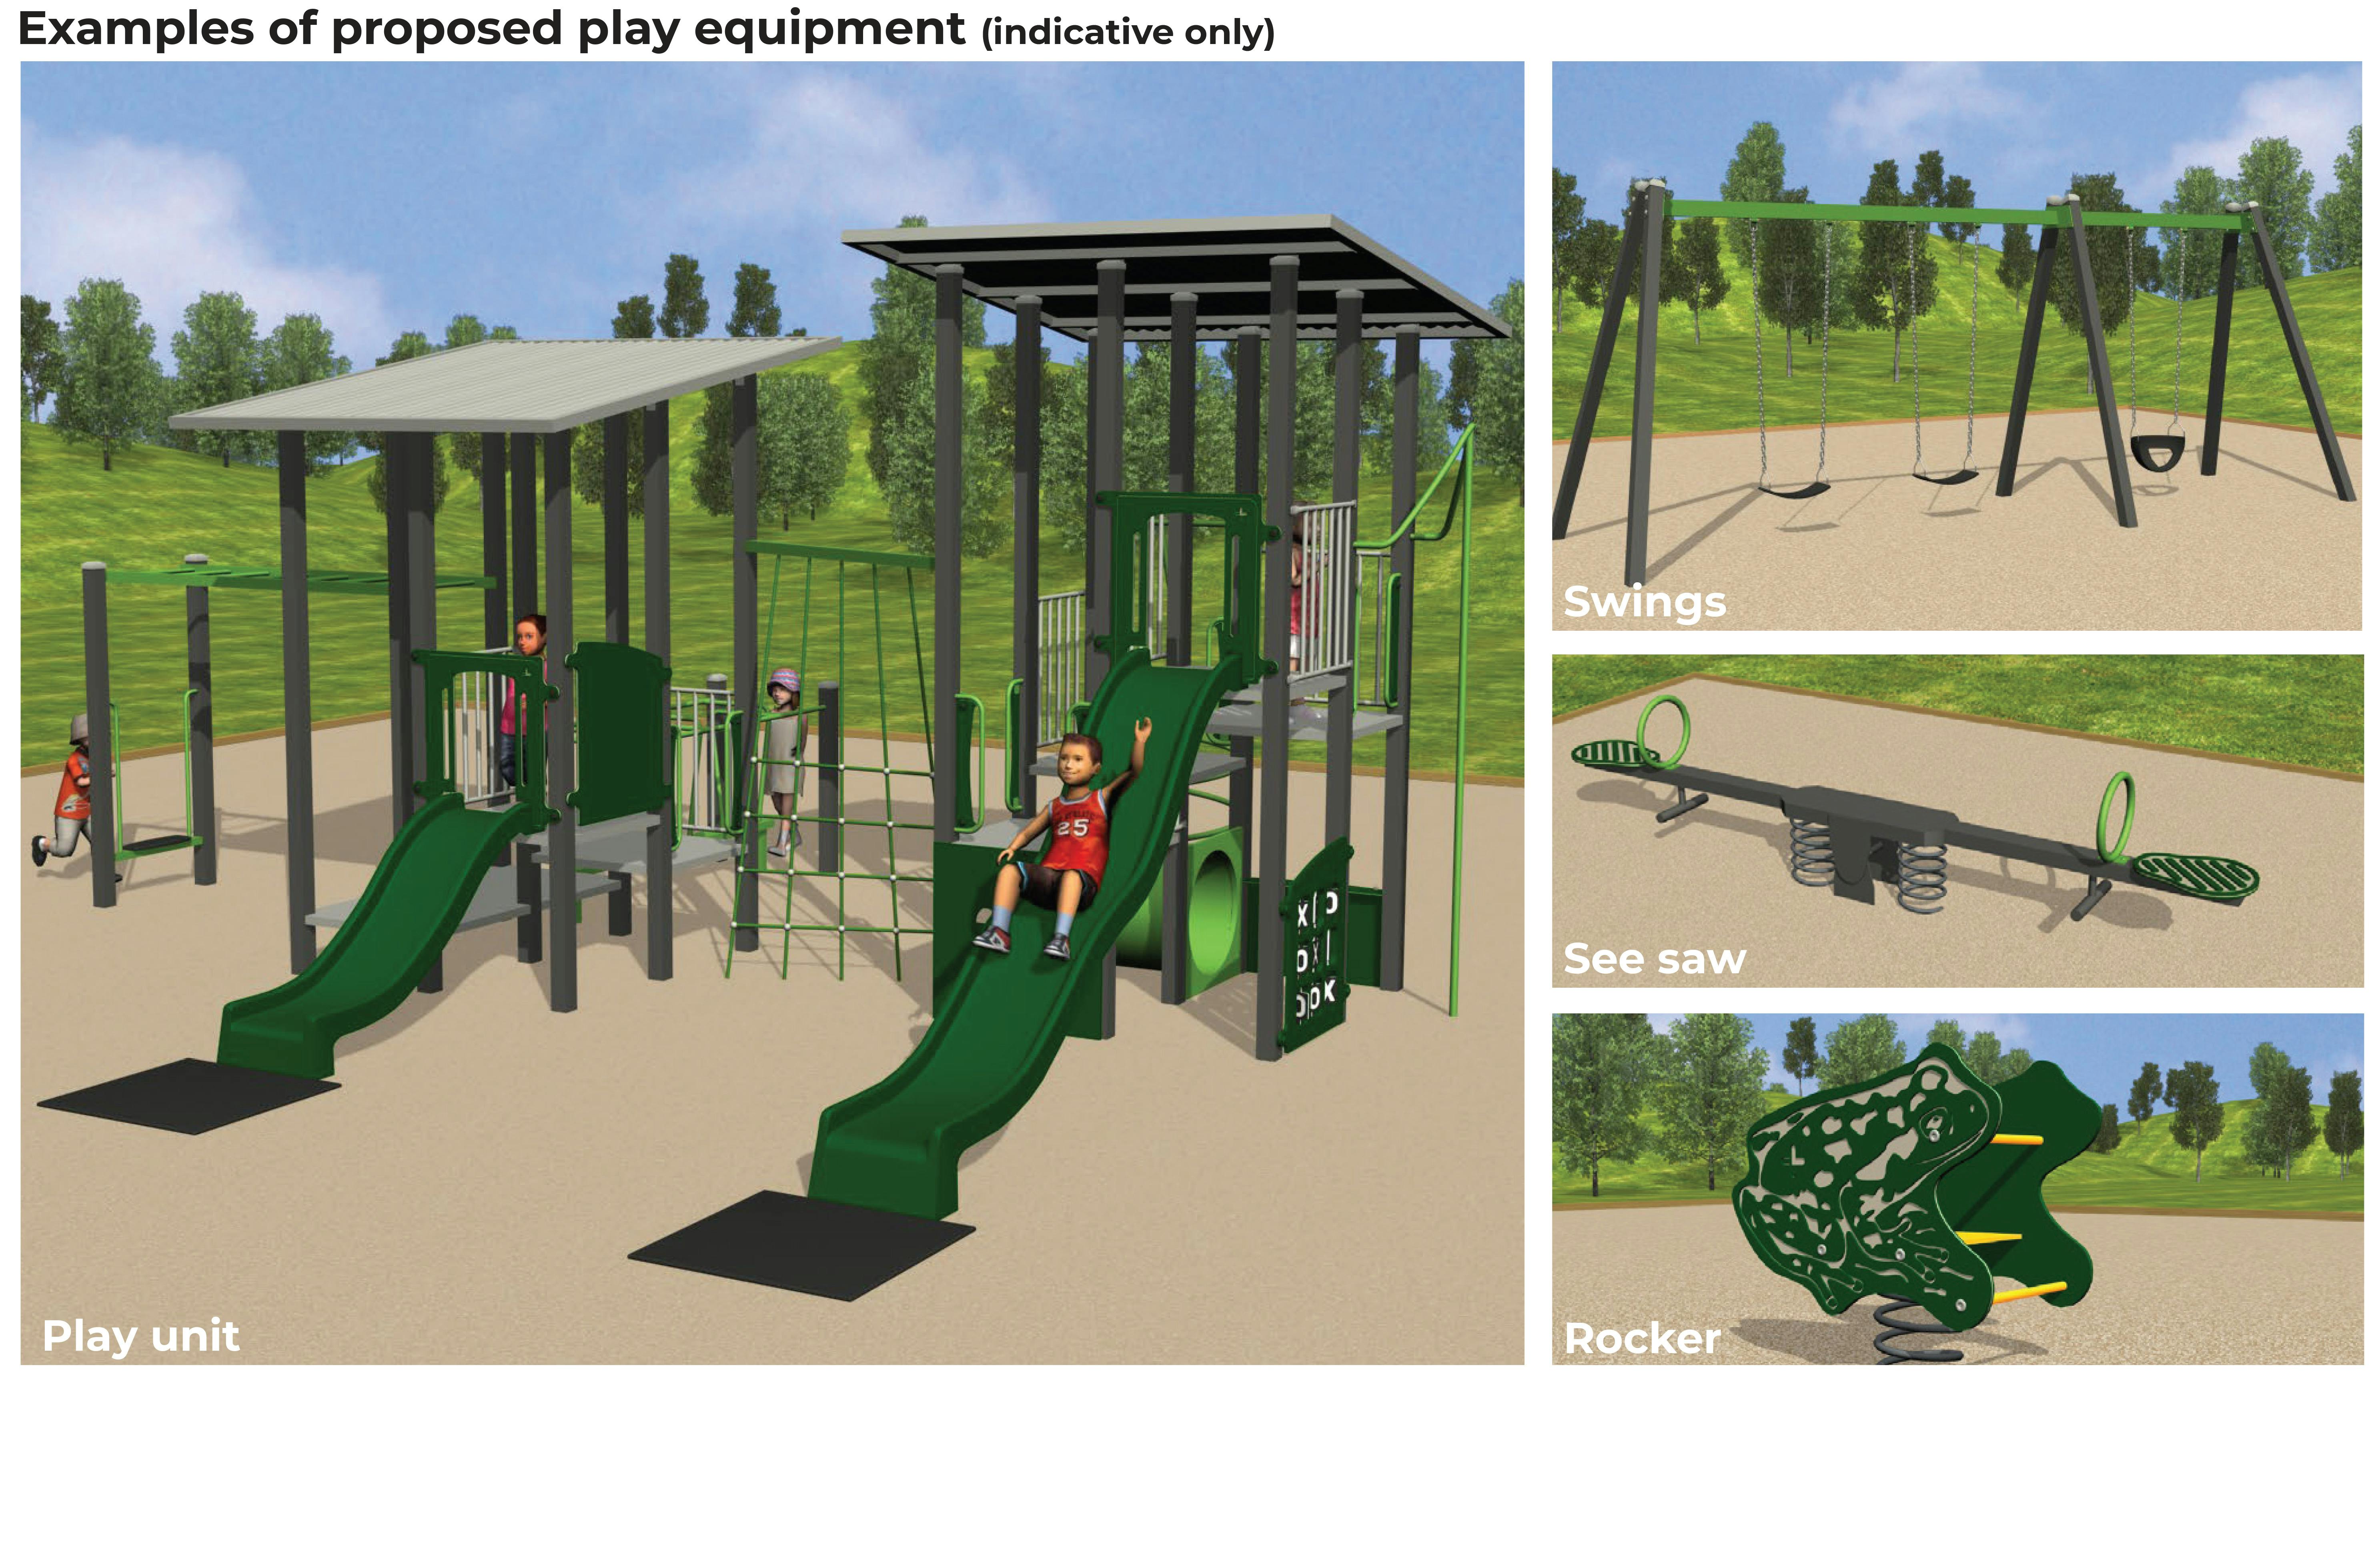 Greenfield Court Reserve - Proposed Play Equipment